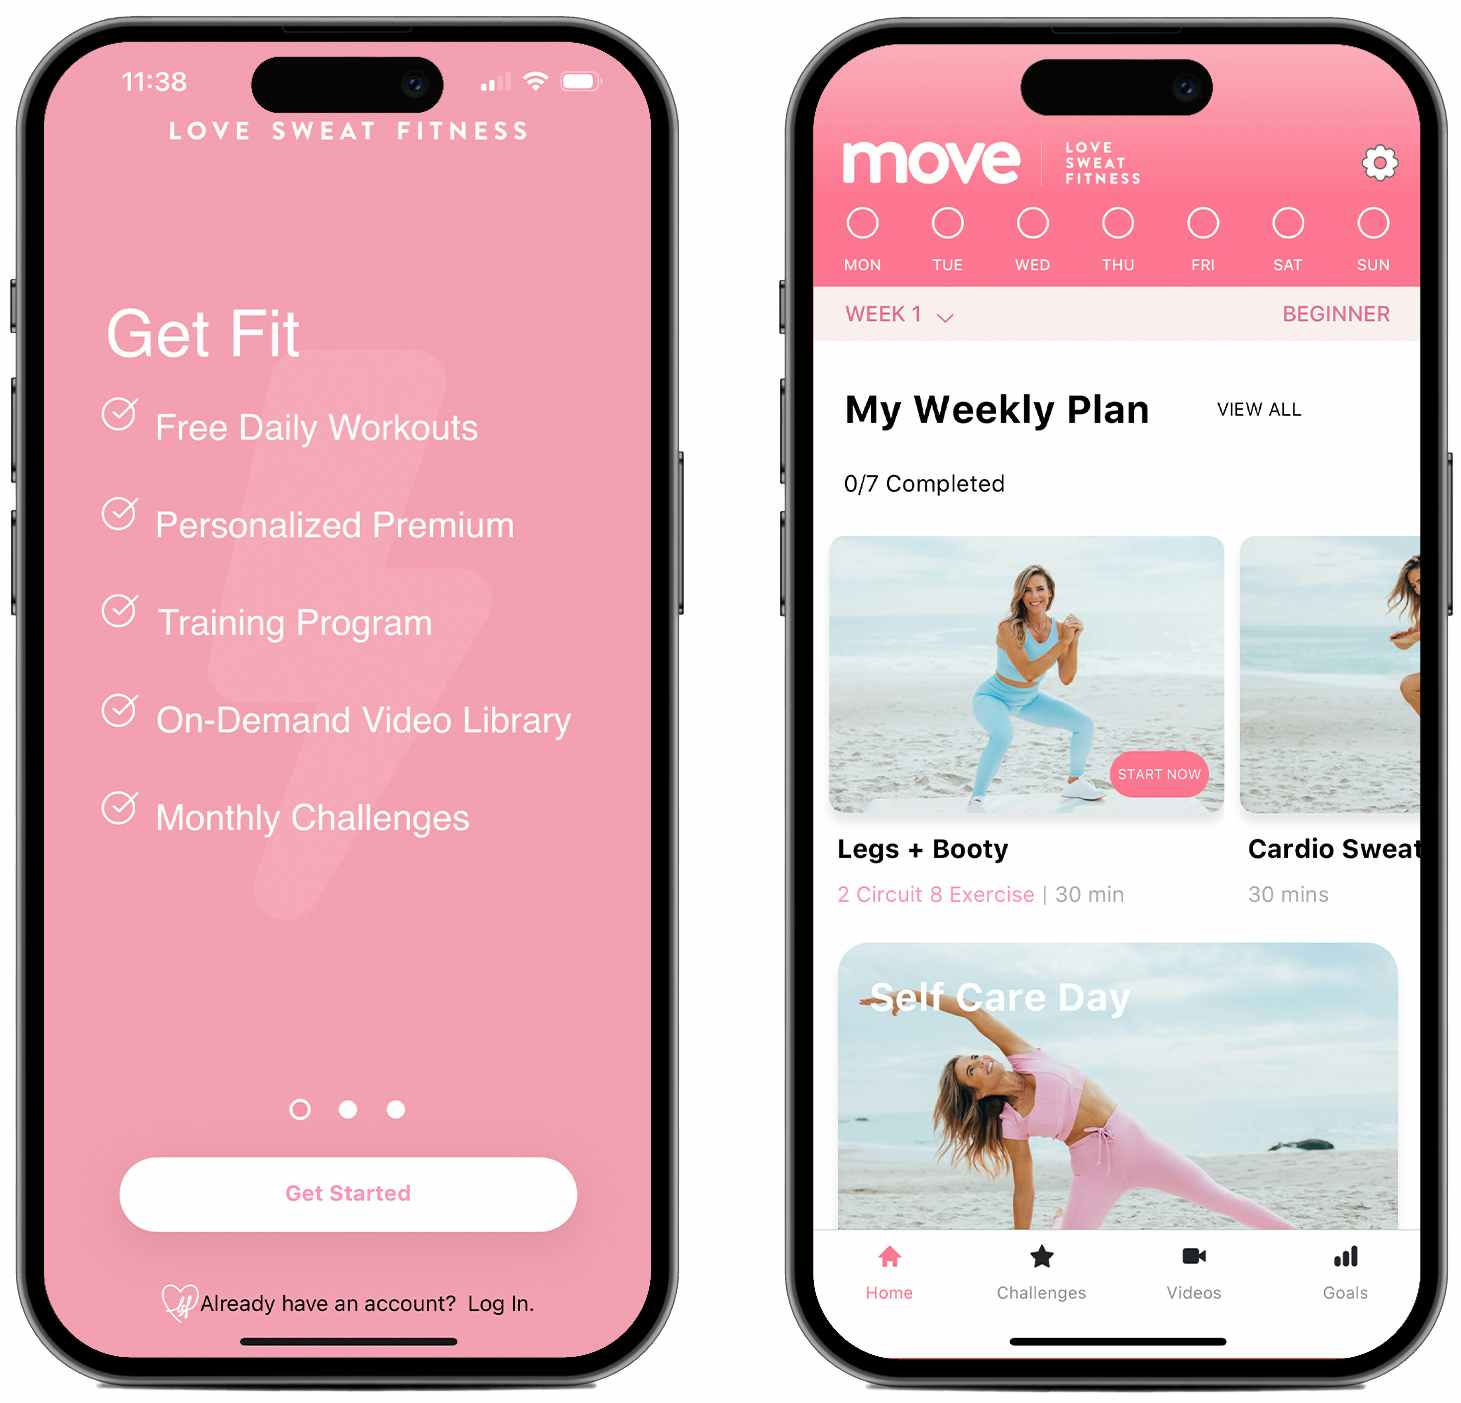 Screenshots from the Move by Love Sweat Fitness fitness app on two iPhone screens